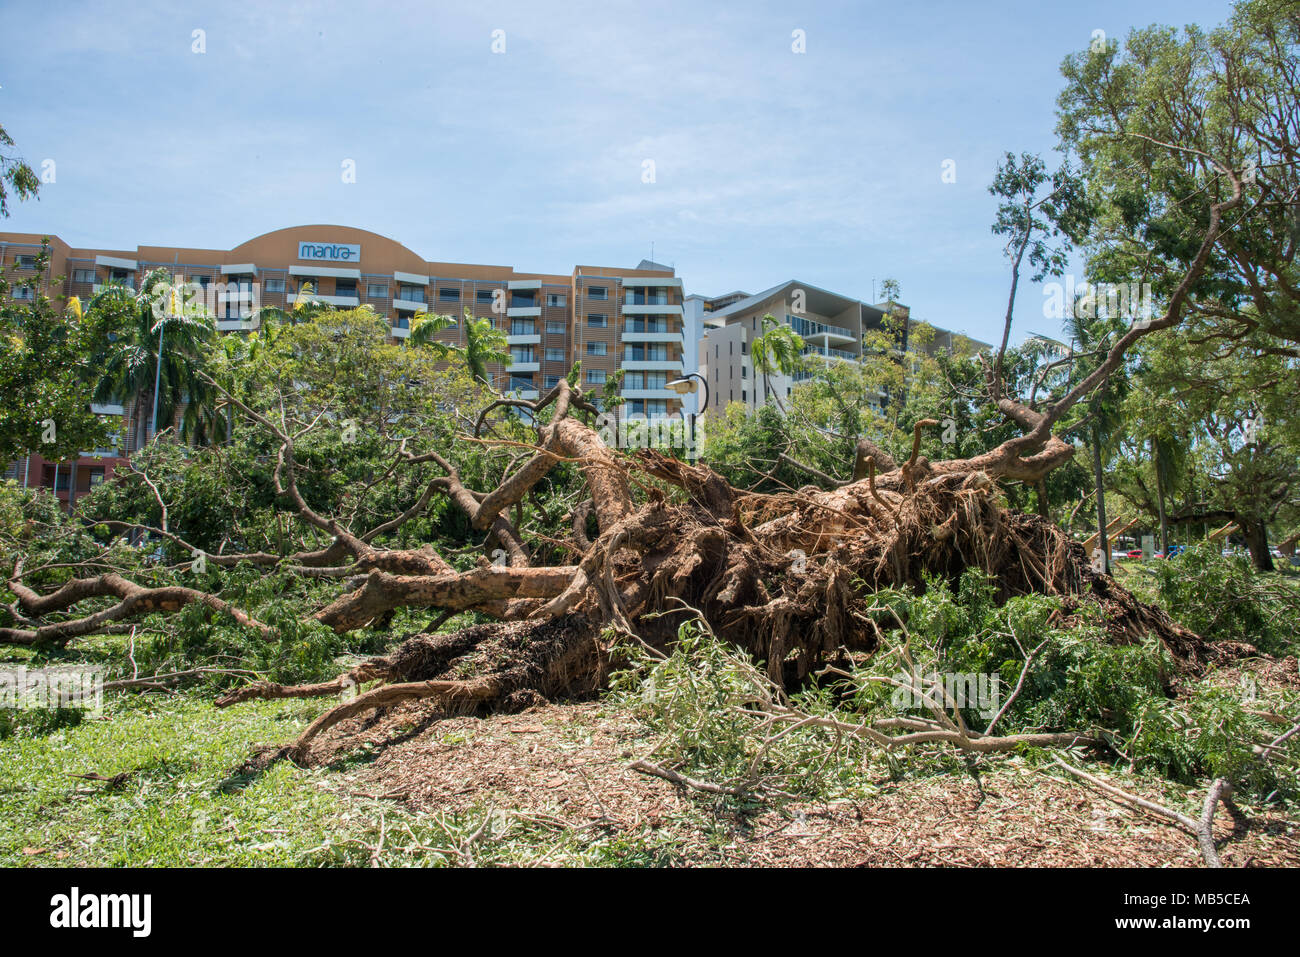 DARWIN,NT,AUSTRALIA-MARCH 18,2018: Cyclone damage with large uprooted tree and Mantra building in Darwin, Australia Stock Photo